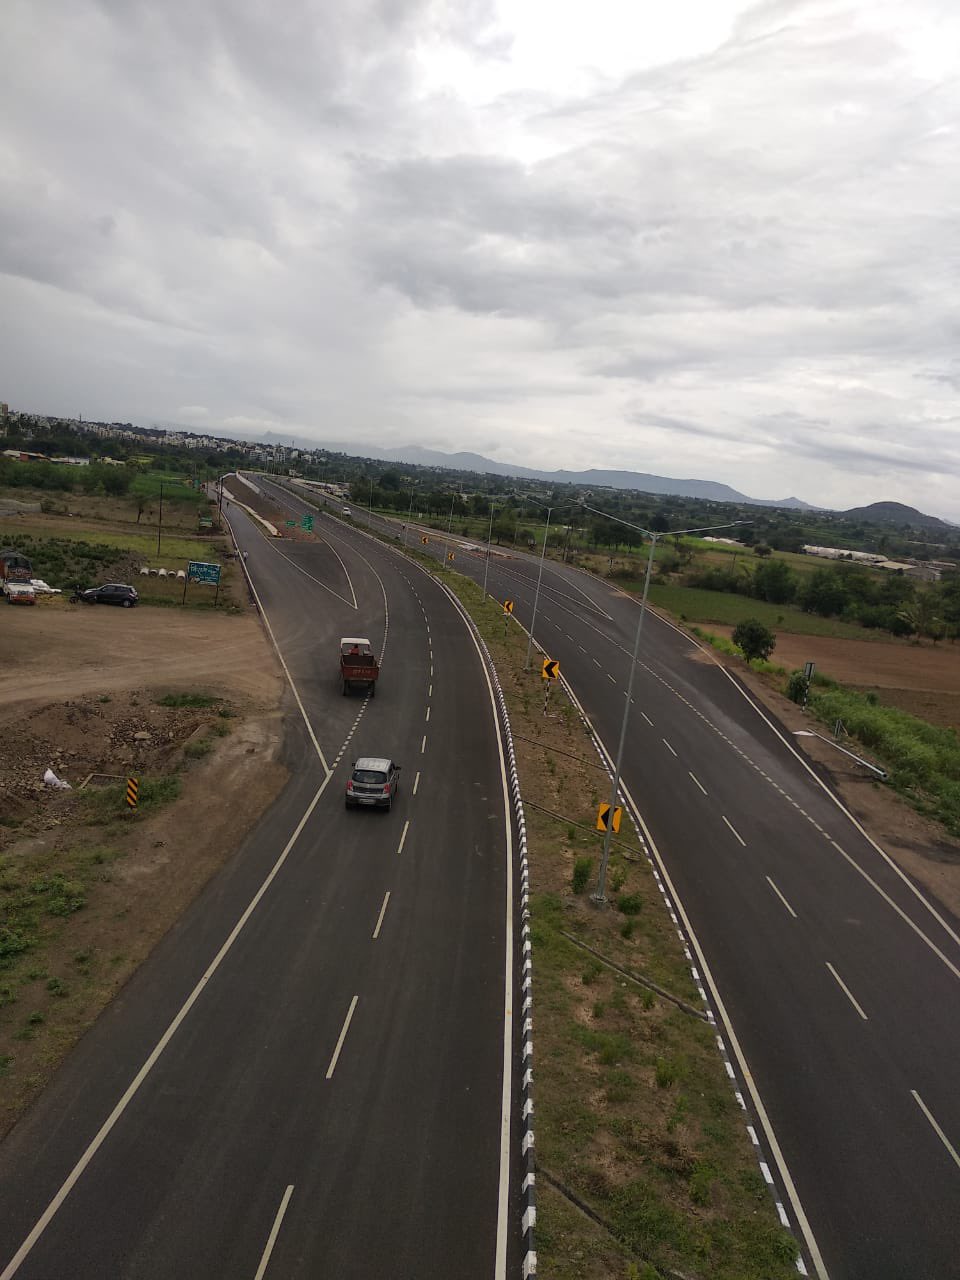 Pune-Nashik journey will be smooth; Narayangaon bypass work completed